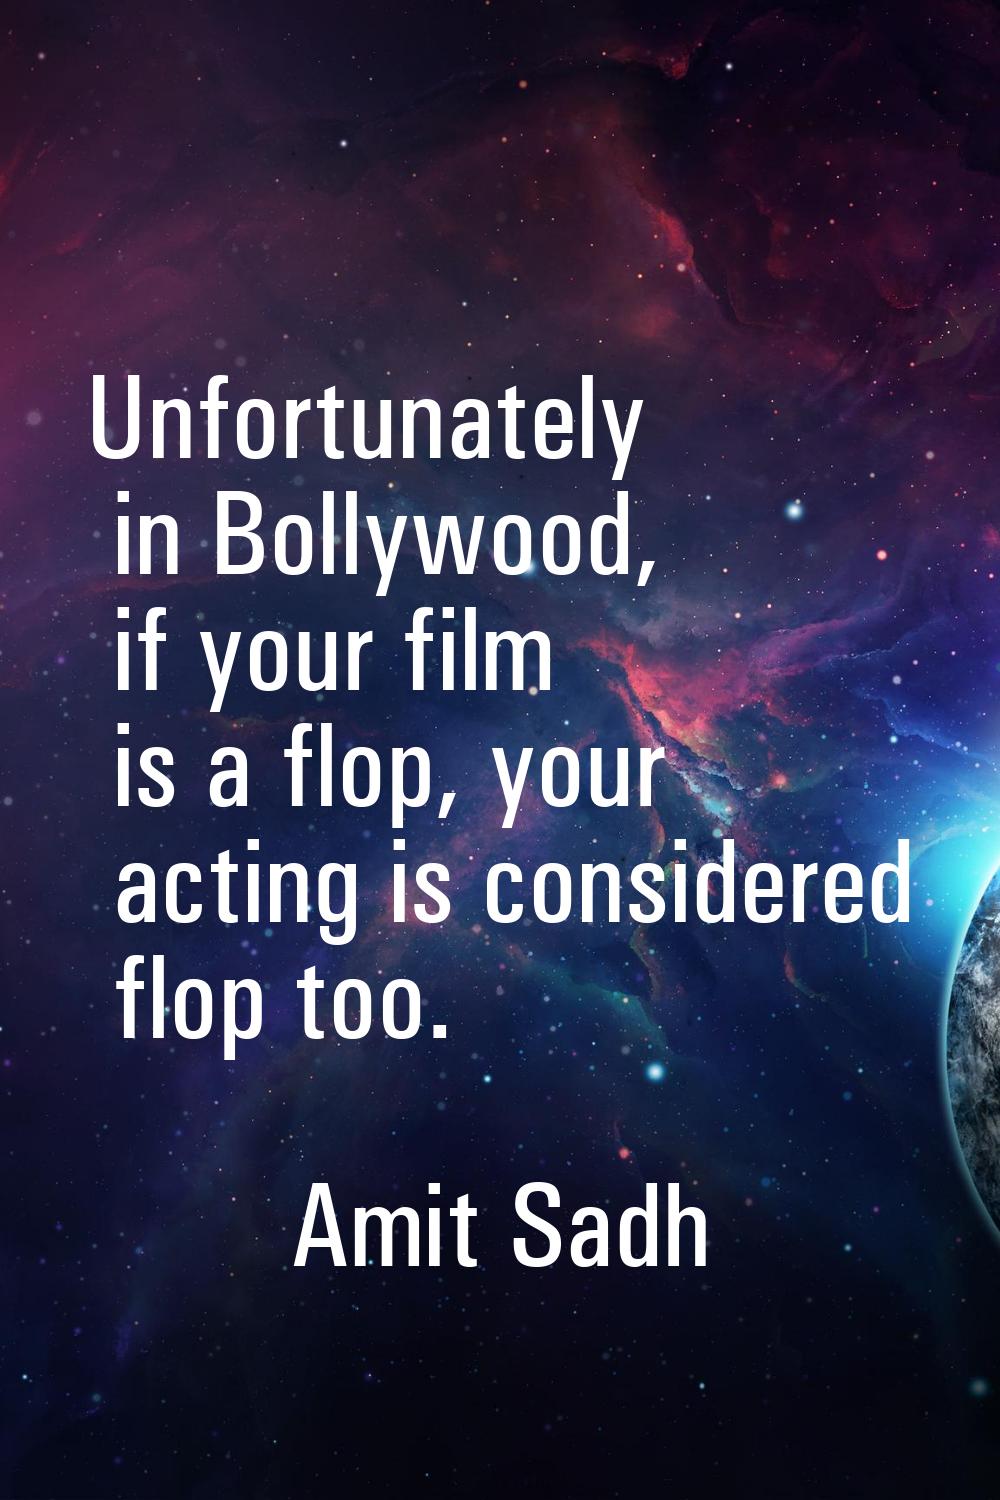 Unfortunately in Bollywood, if your film is a flop, your acting is considered flop too.